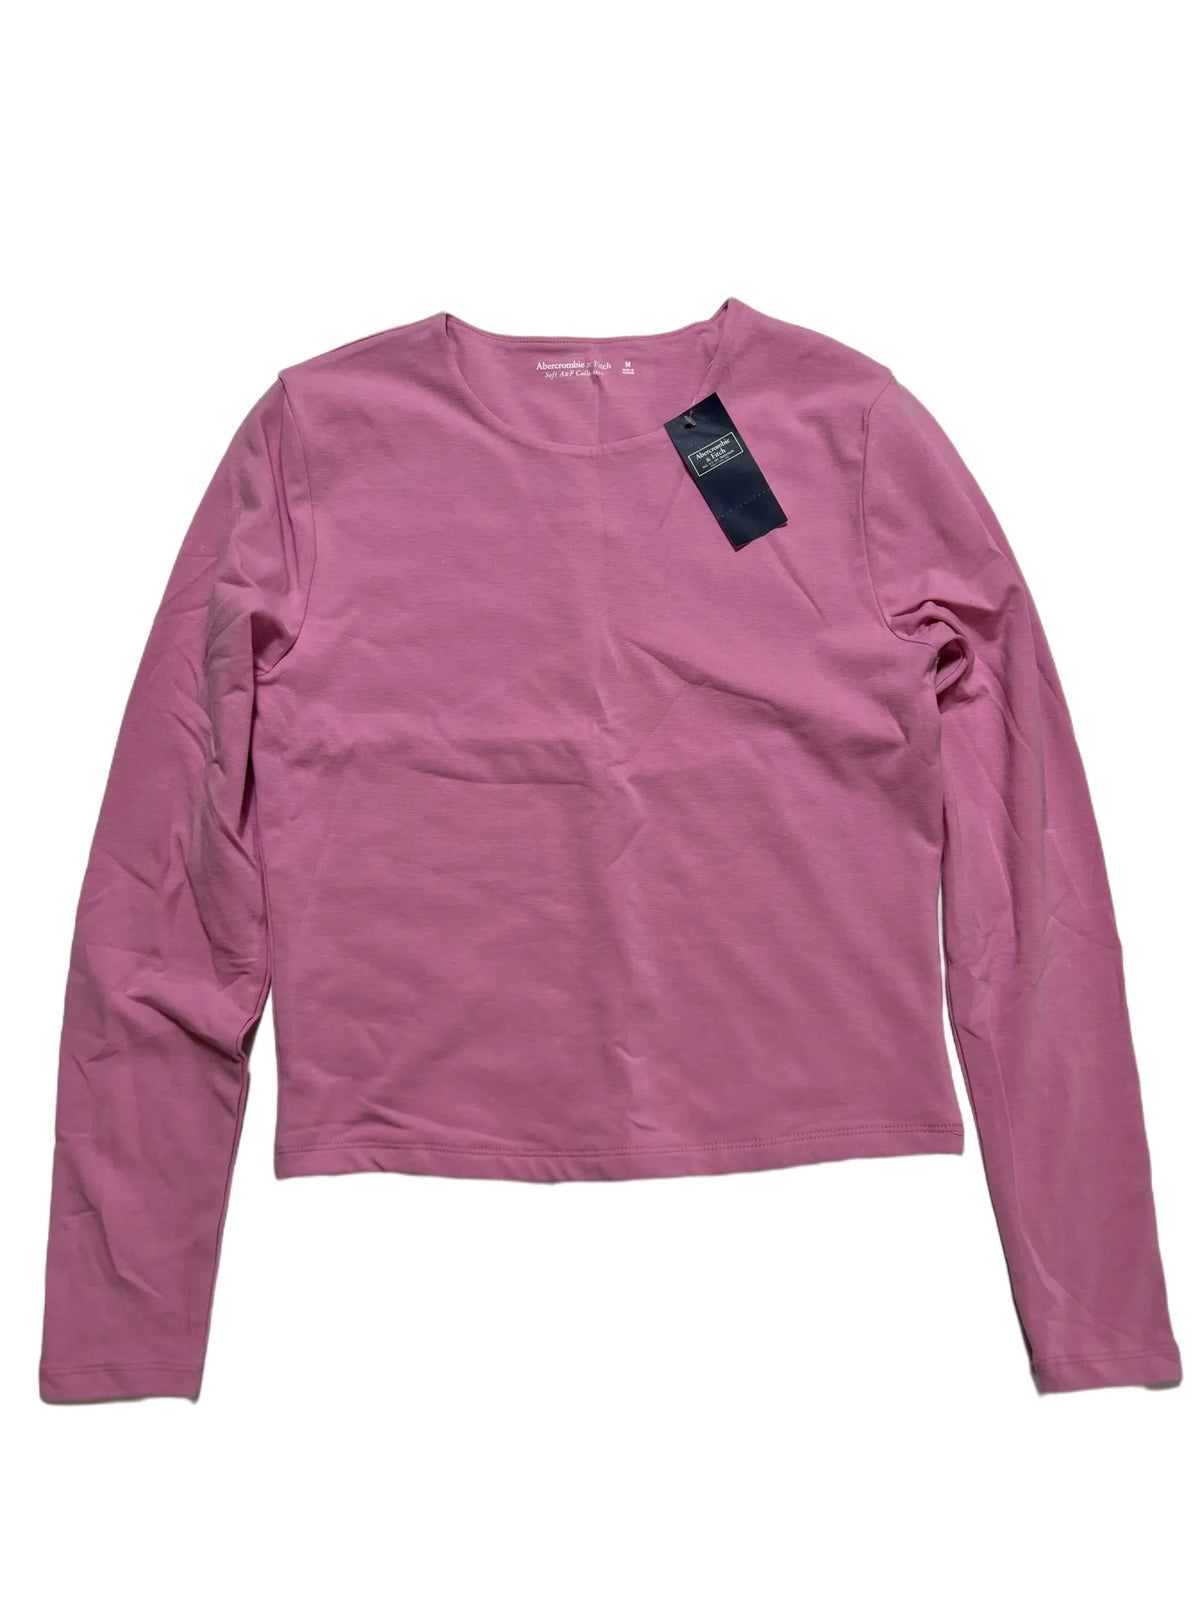 Abercrombie & Fitch- Pink Long Sleeve Top New With Tags!